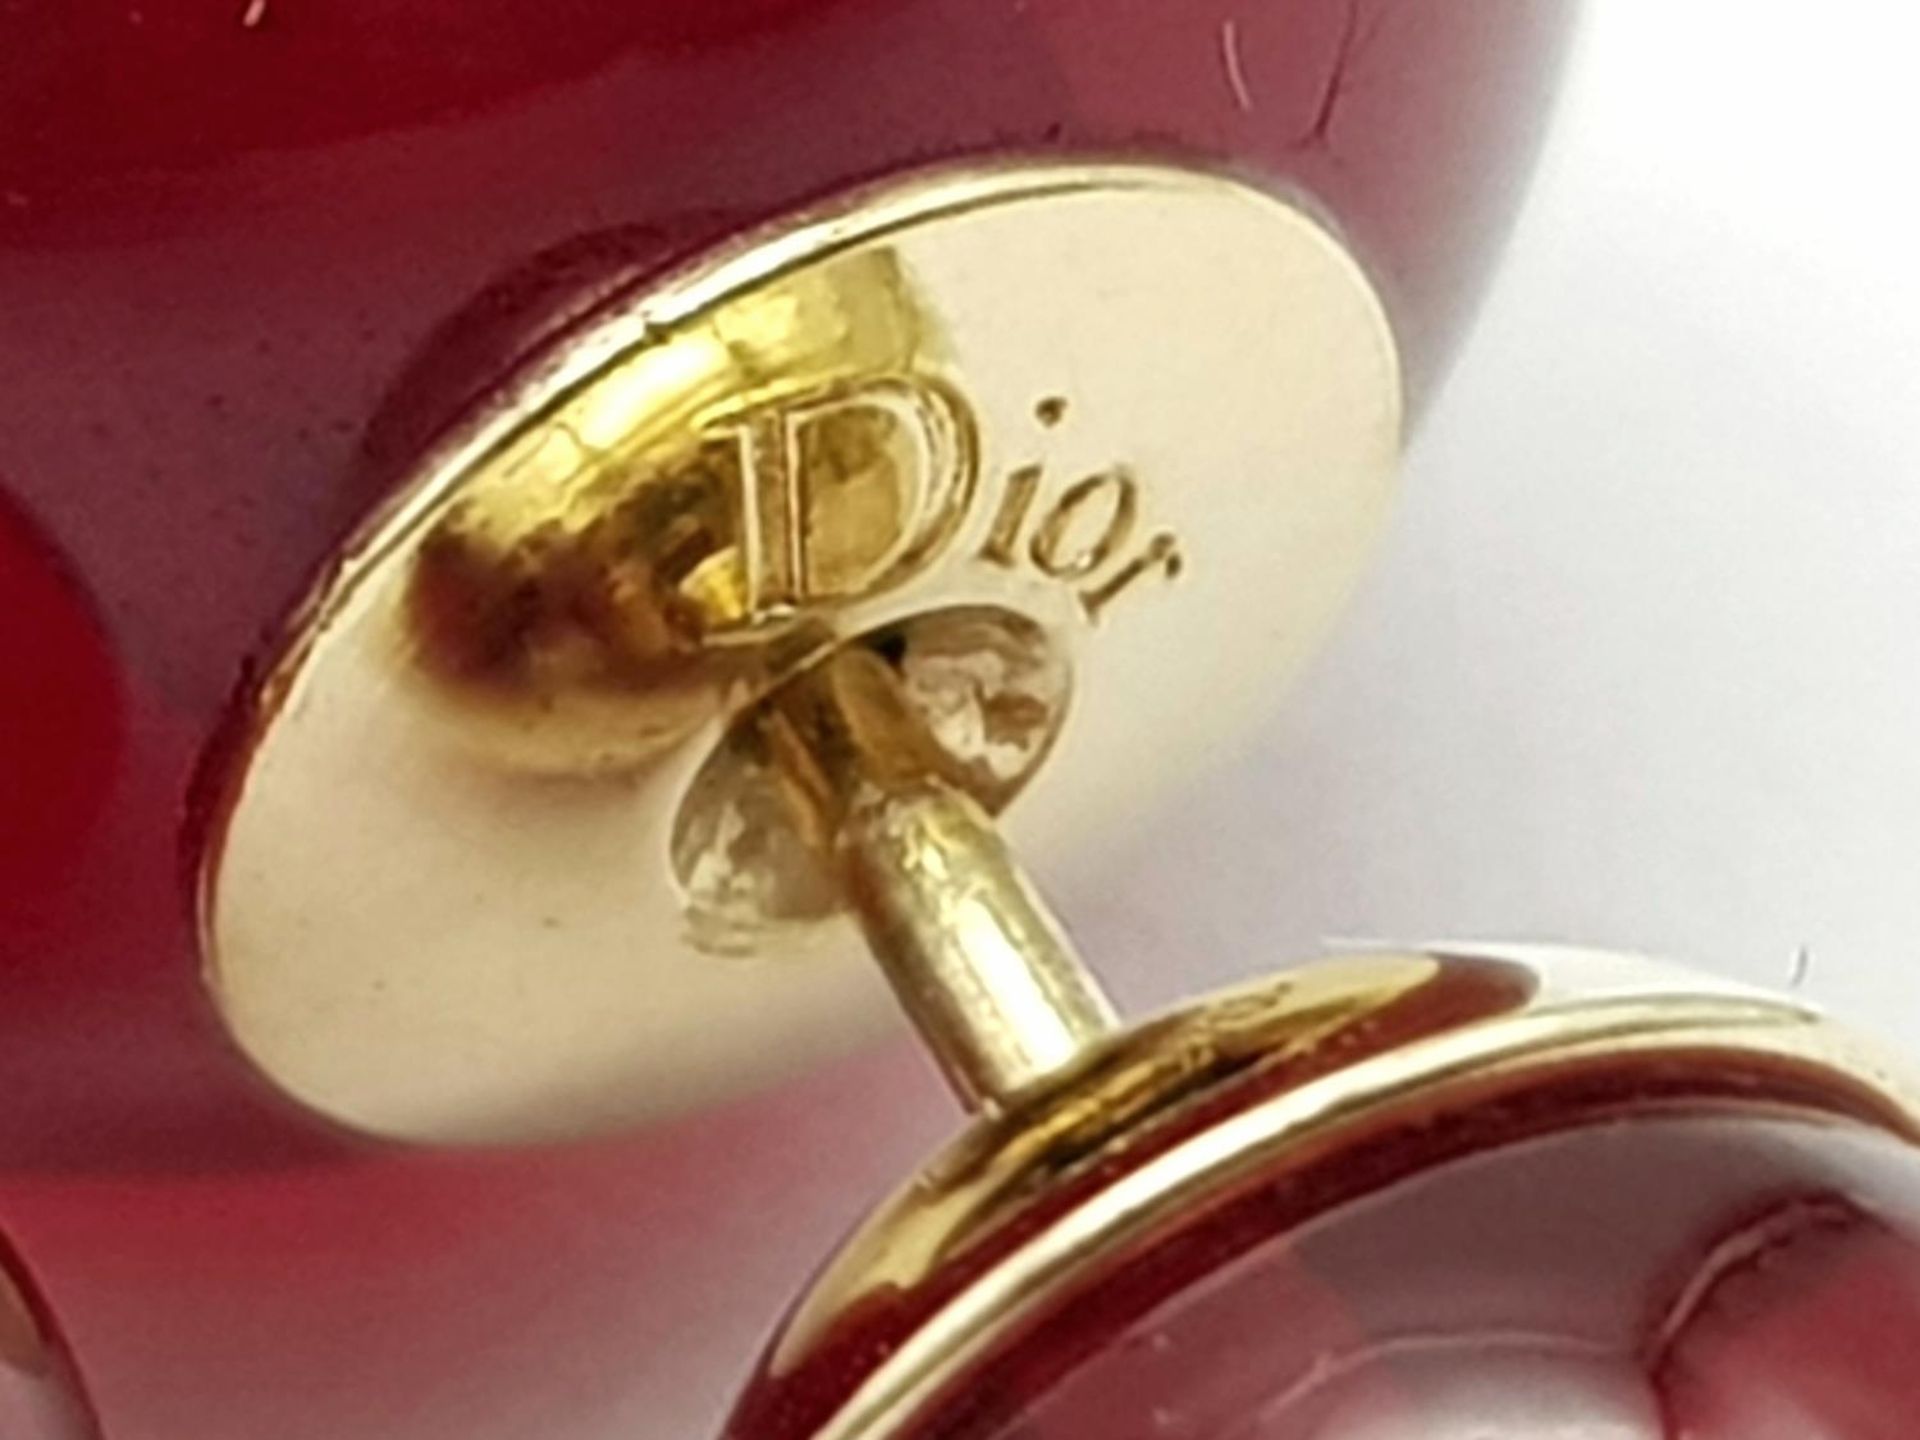 A Pair of Dior Cherry Red Orb Earrings. Comes in Dior packaging. - Image 3 of 5